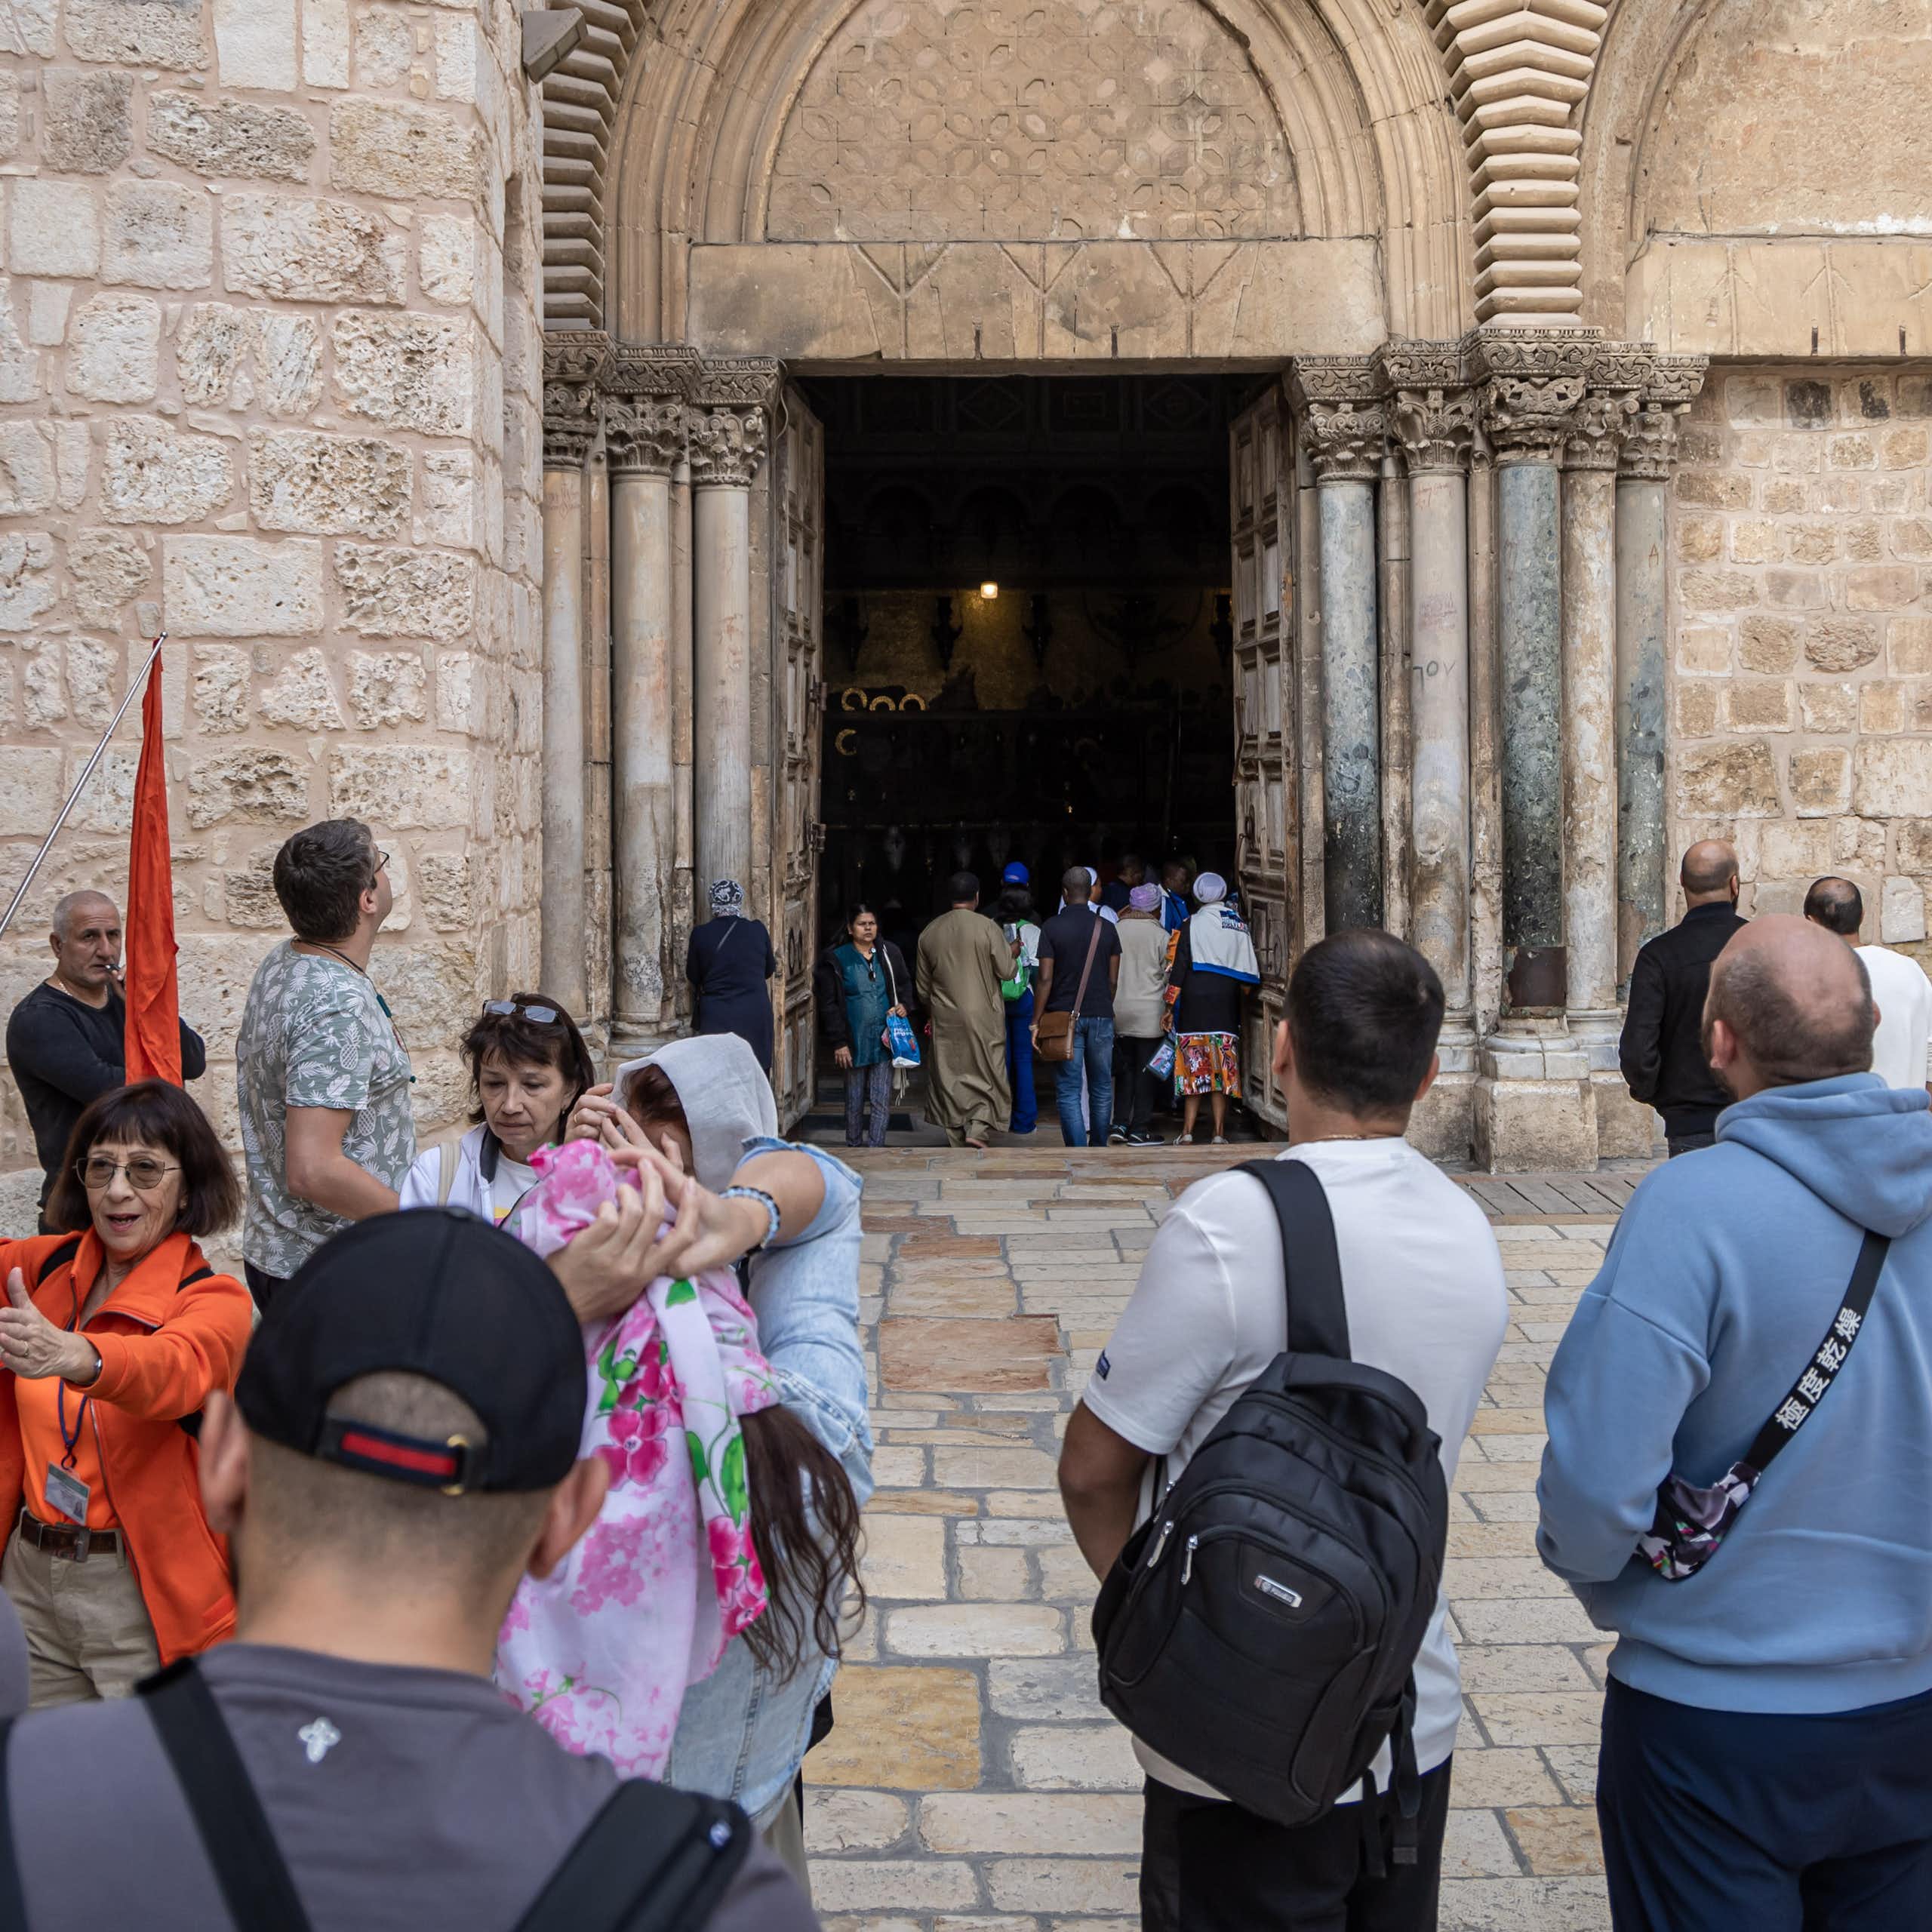 A crowd of tourists entering an old church.